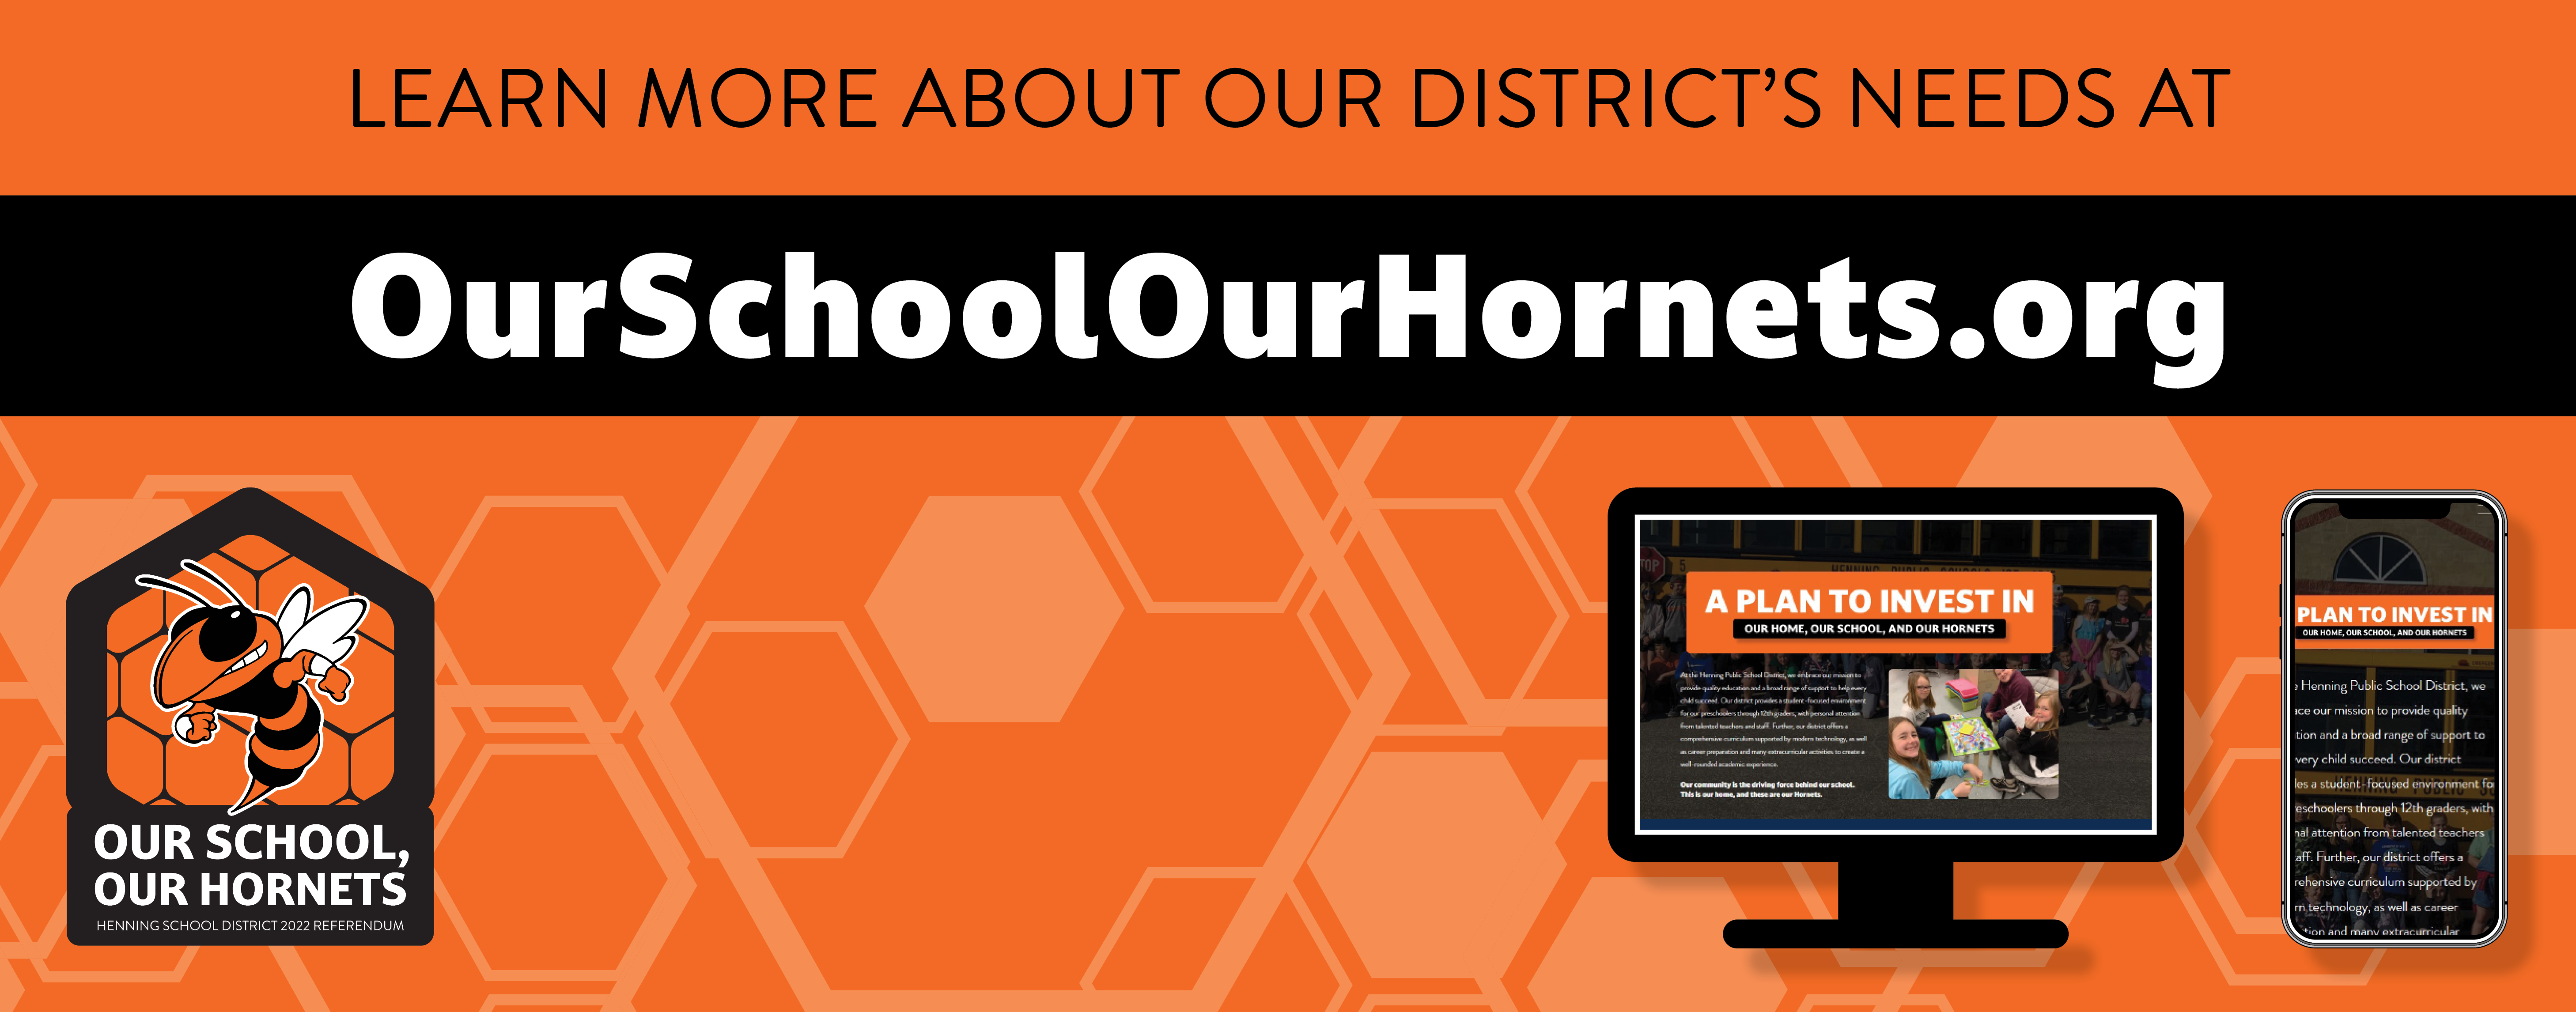 Learn more about our district's needs at ourschoolsourhornets.org